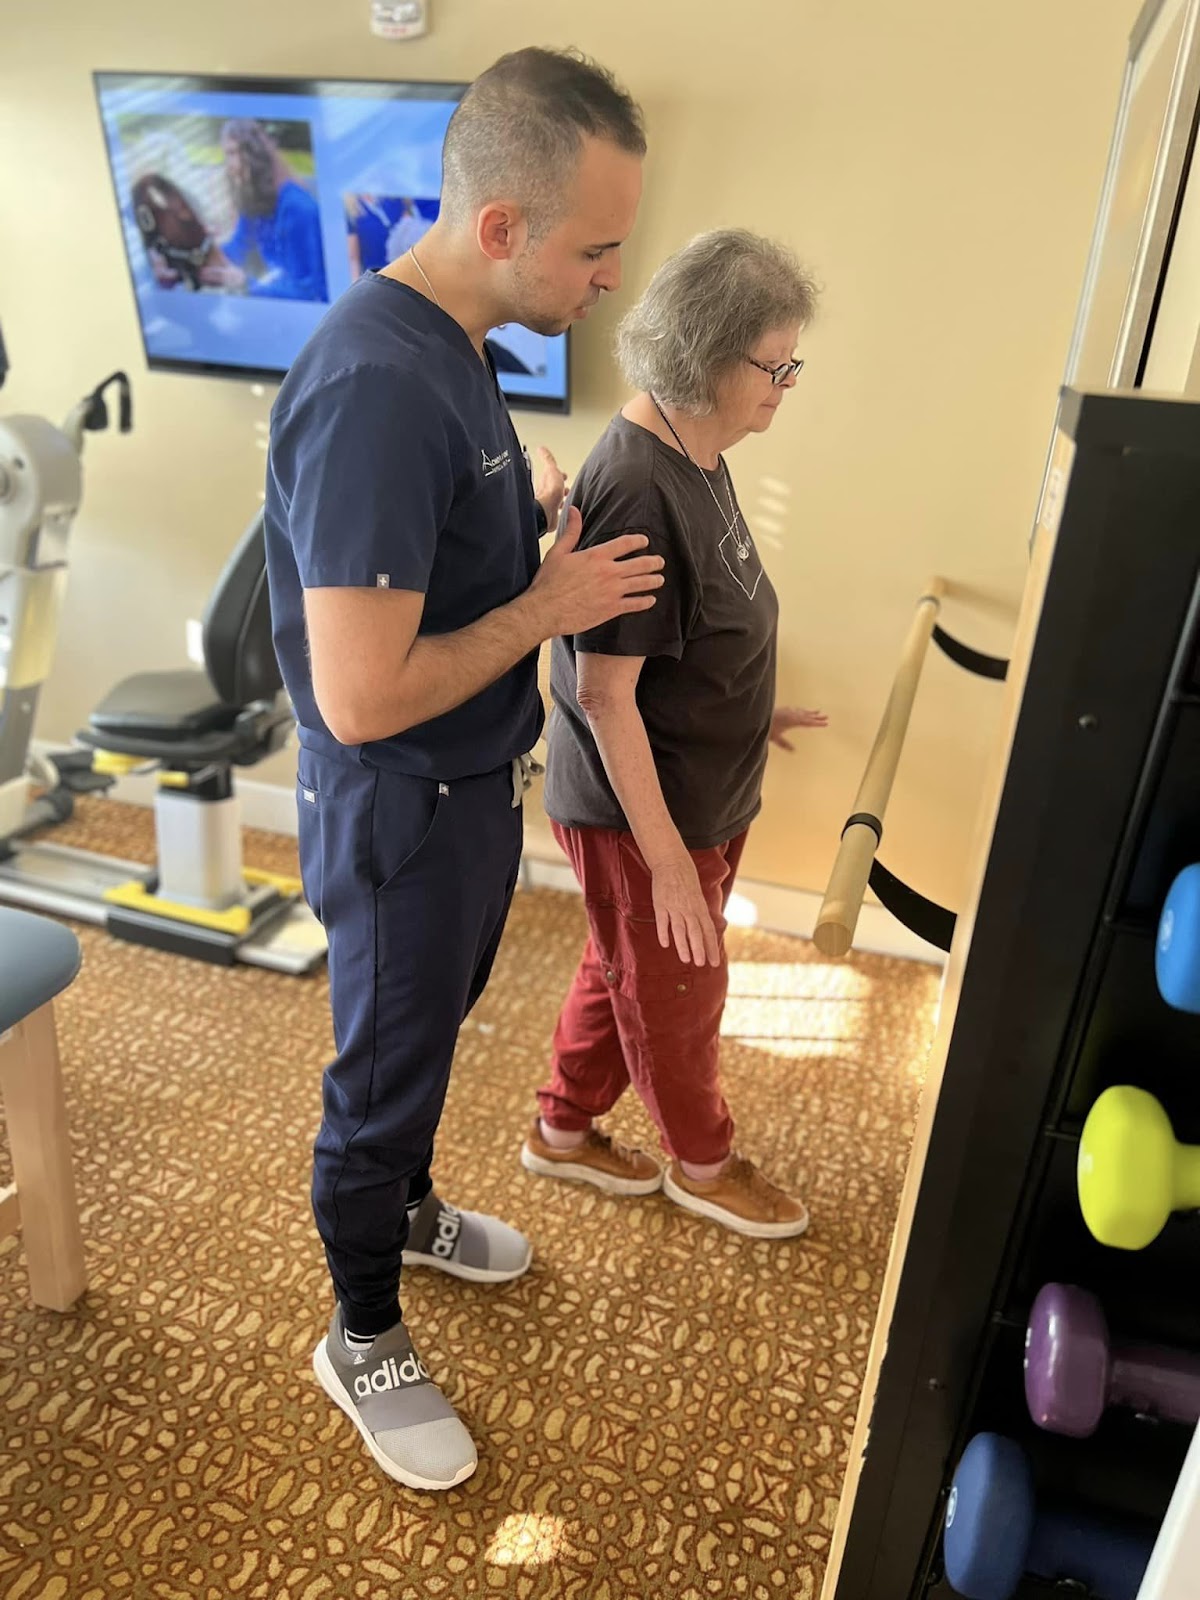 A healthcare professional providing physical therapy care to a resident in an assisted living facility